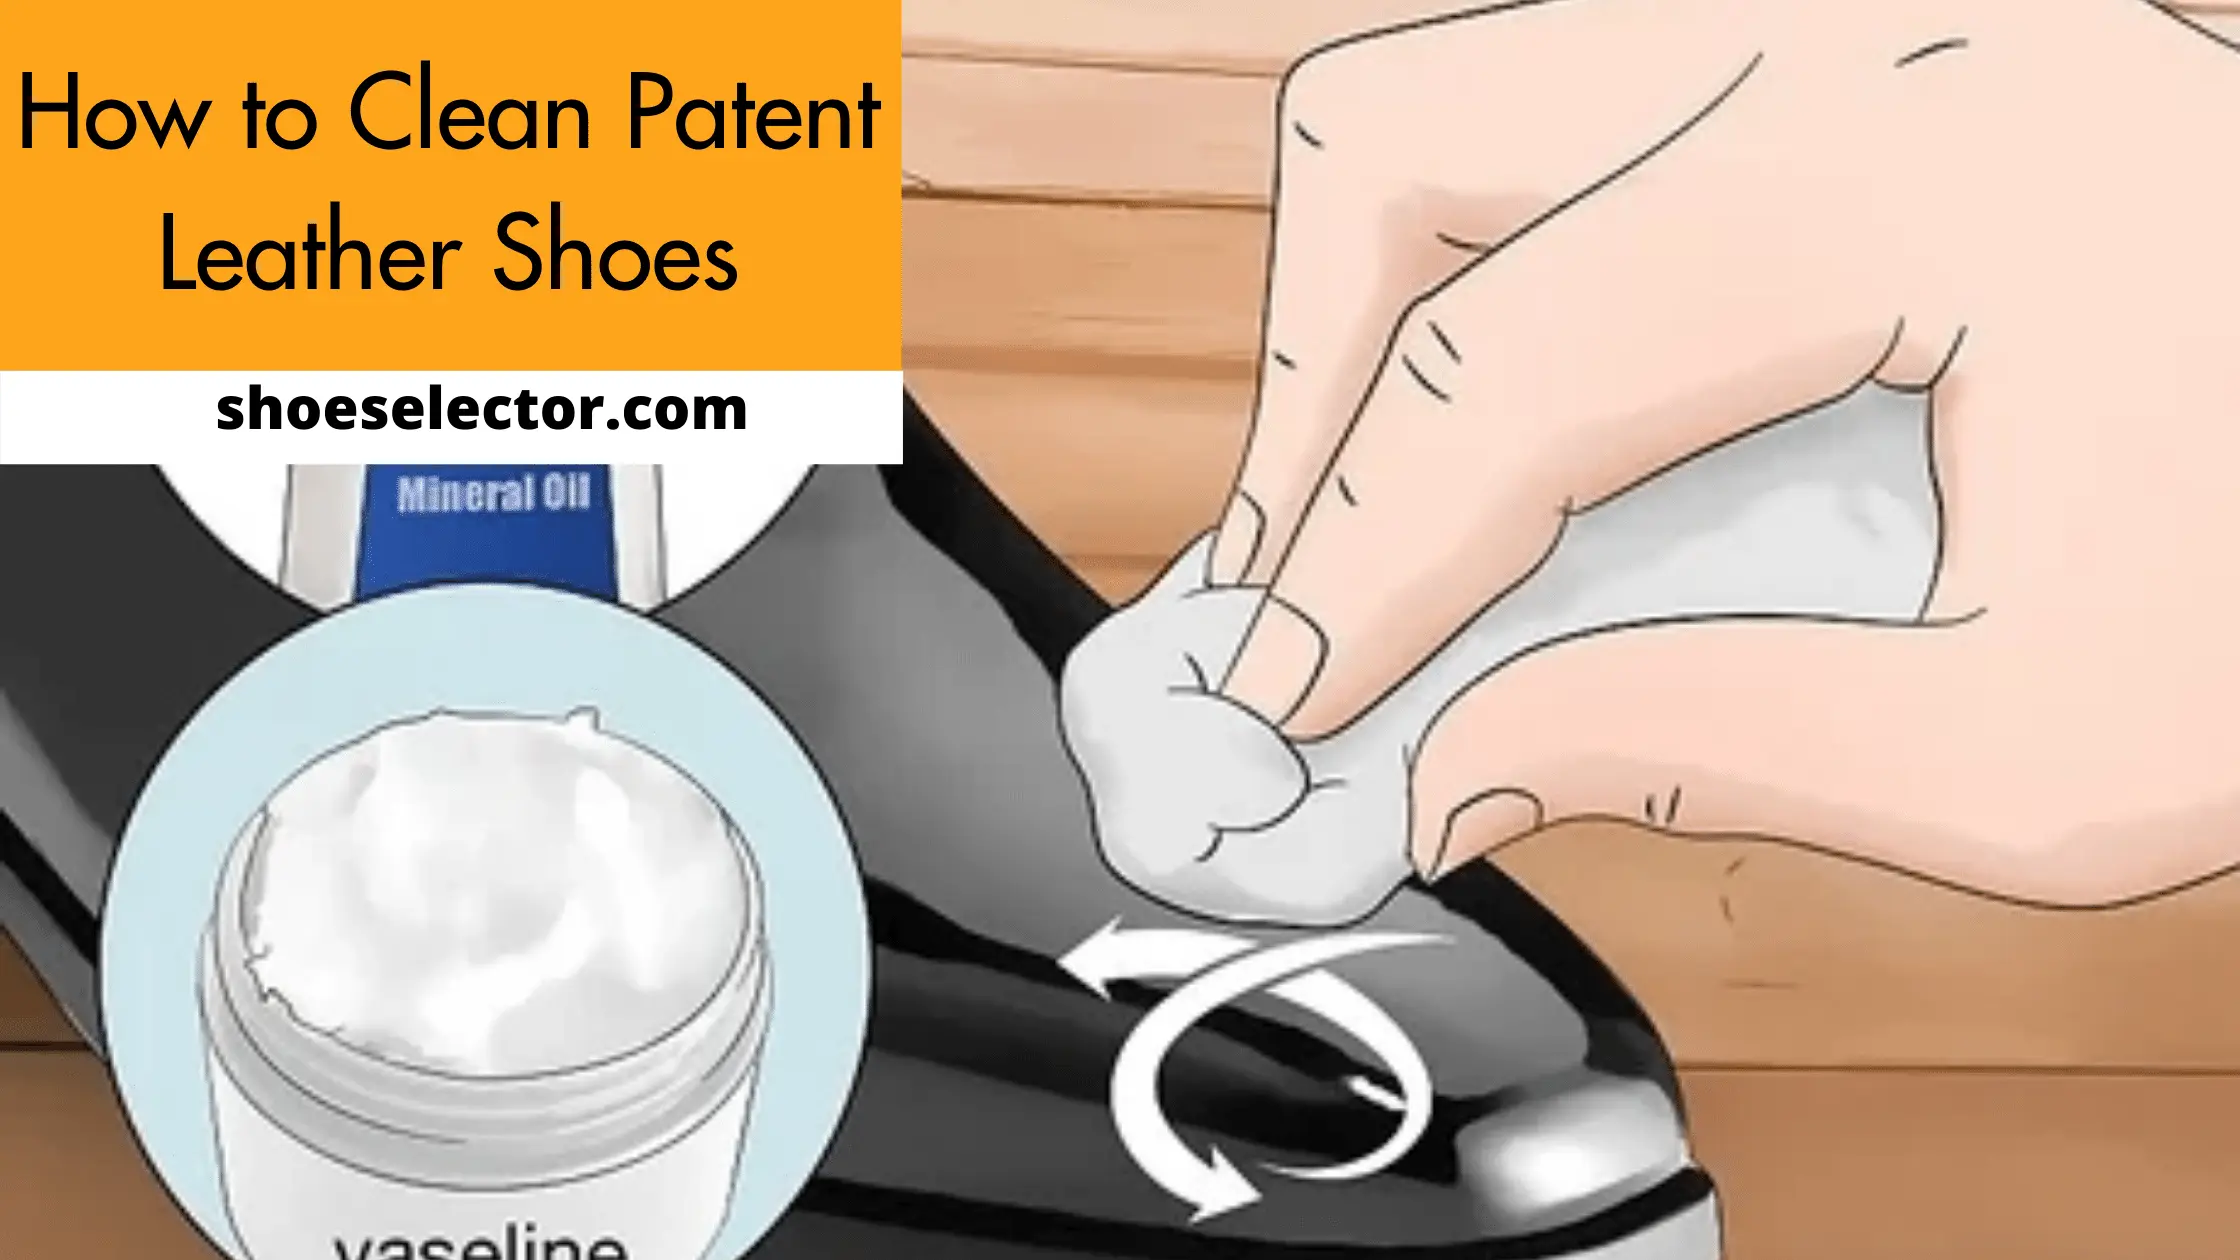 How to Clean Patent Leather Shoes In No Time? - #1 Guide